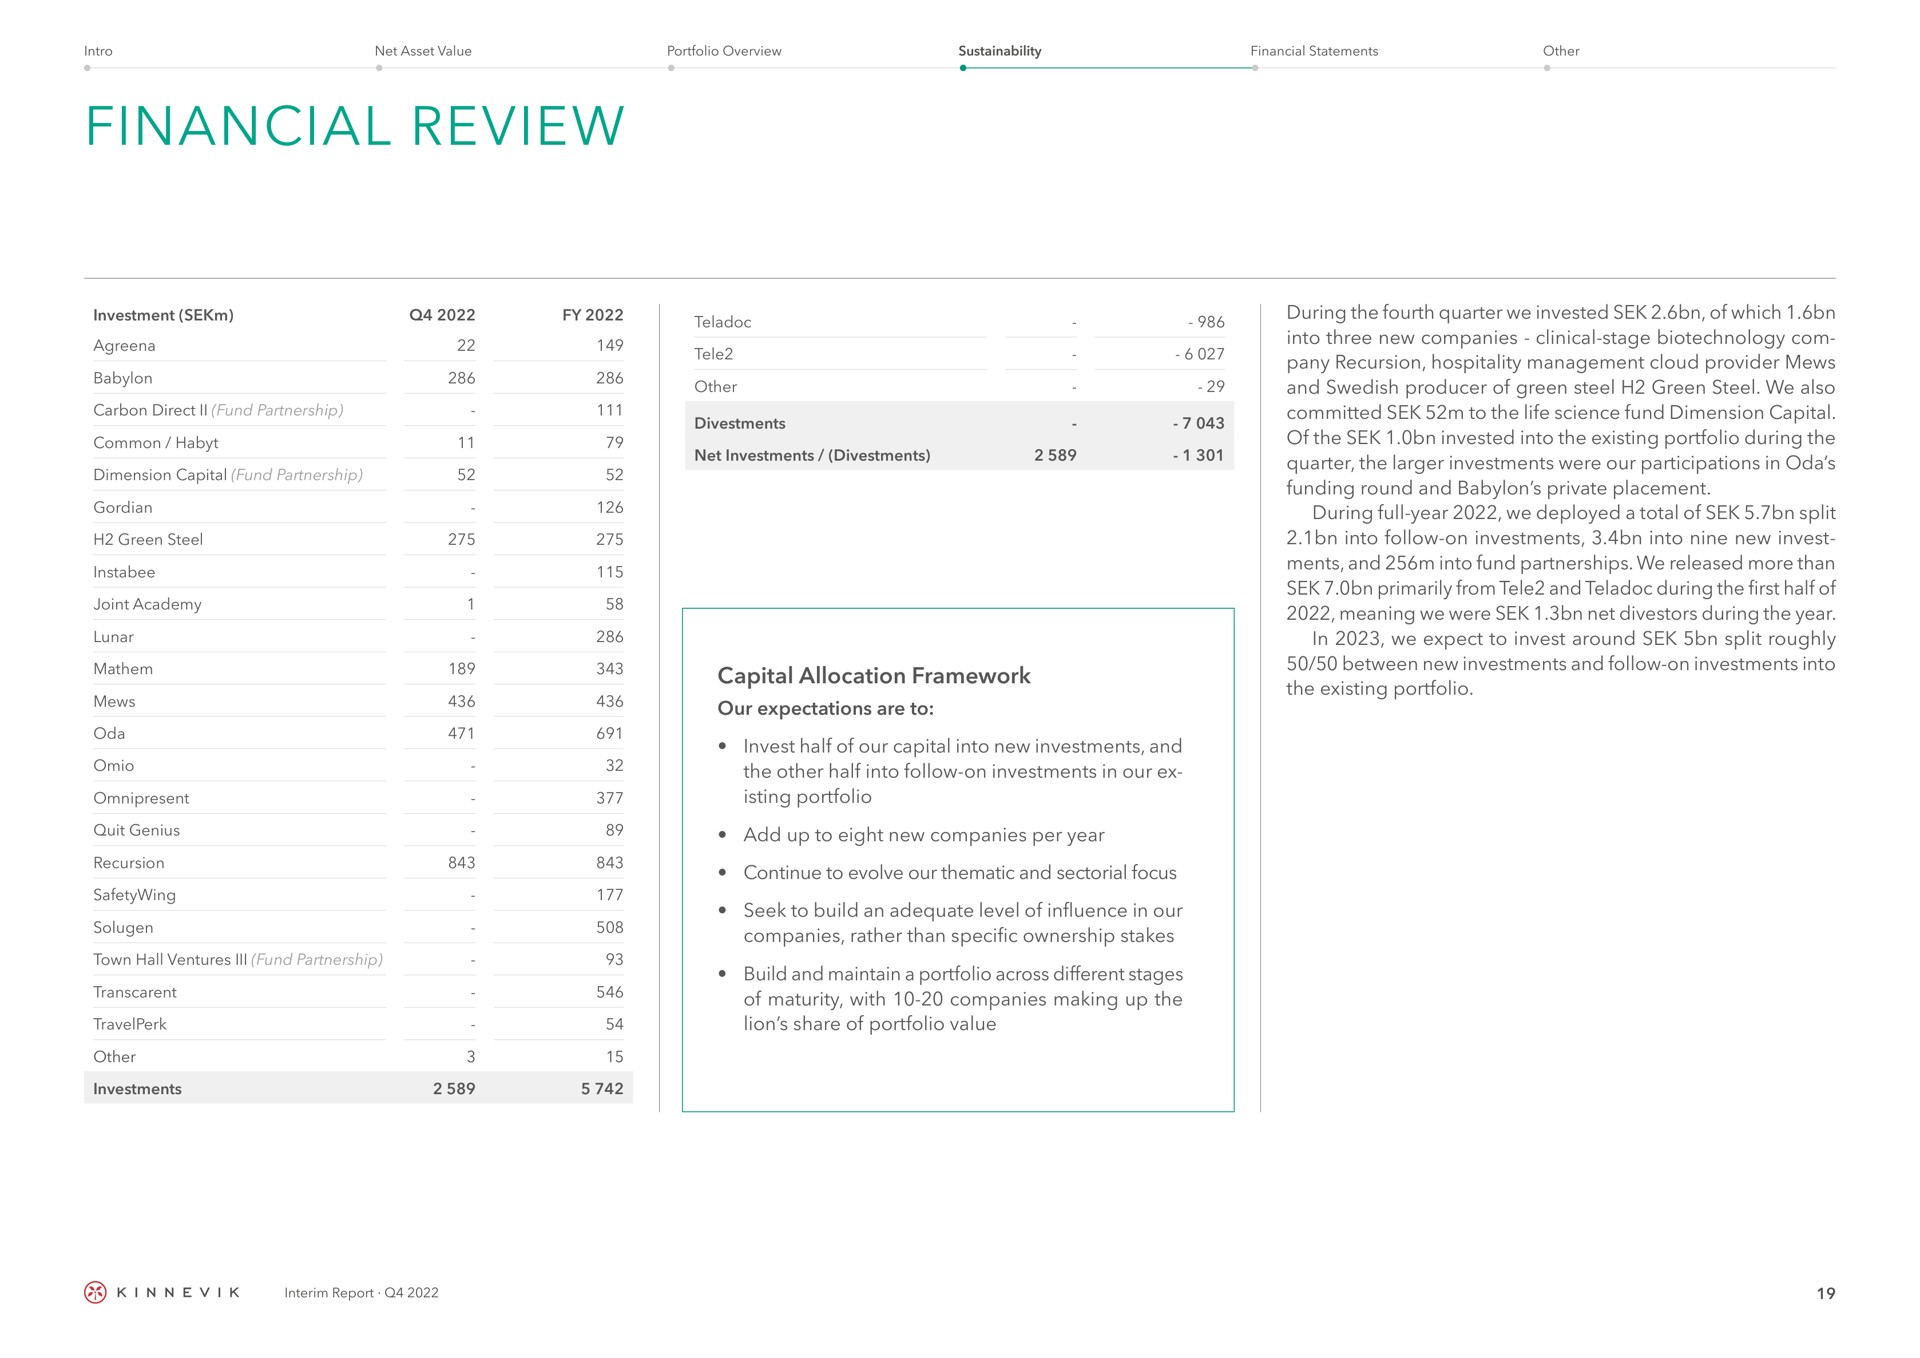 financial review capital allocation framework our expectations are to portfolio add up to eight new companies per year seek to build an adequate level of influence in our companies rather than specific ownership stakes build and maintain a portfolio across different stages of maturity with companies making up the lion share of portfolio value during the fourth quarter we invested of which into three new companies clinical stage recursion hospitality management cloud provider mews and producer of green steel green steel we also committed to the life science fund dimension of the invested into the existing portfolio during the quarter the investments were our participations in oda funding round and private placement during full year we deployed a total of split and into fund partnerships we released more than primarily from tele and during the first half of meaning we were net during the year in we expect to invest around split roughly between new investments and follow on investments into the existing portfolio interim report | Kinnevik